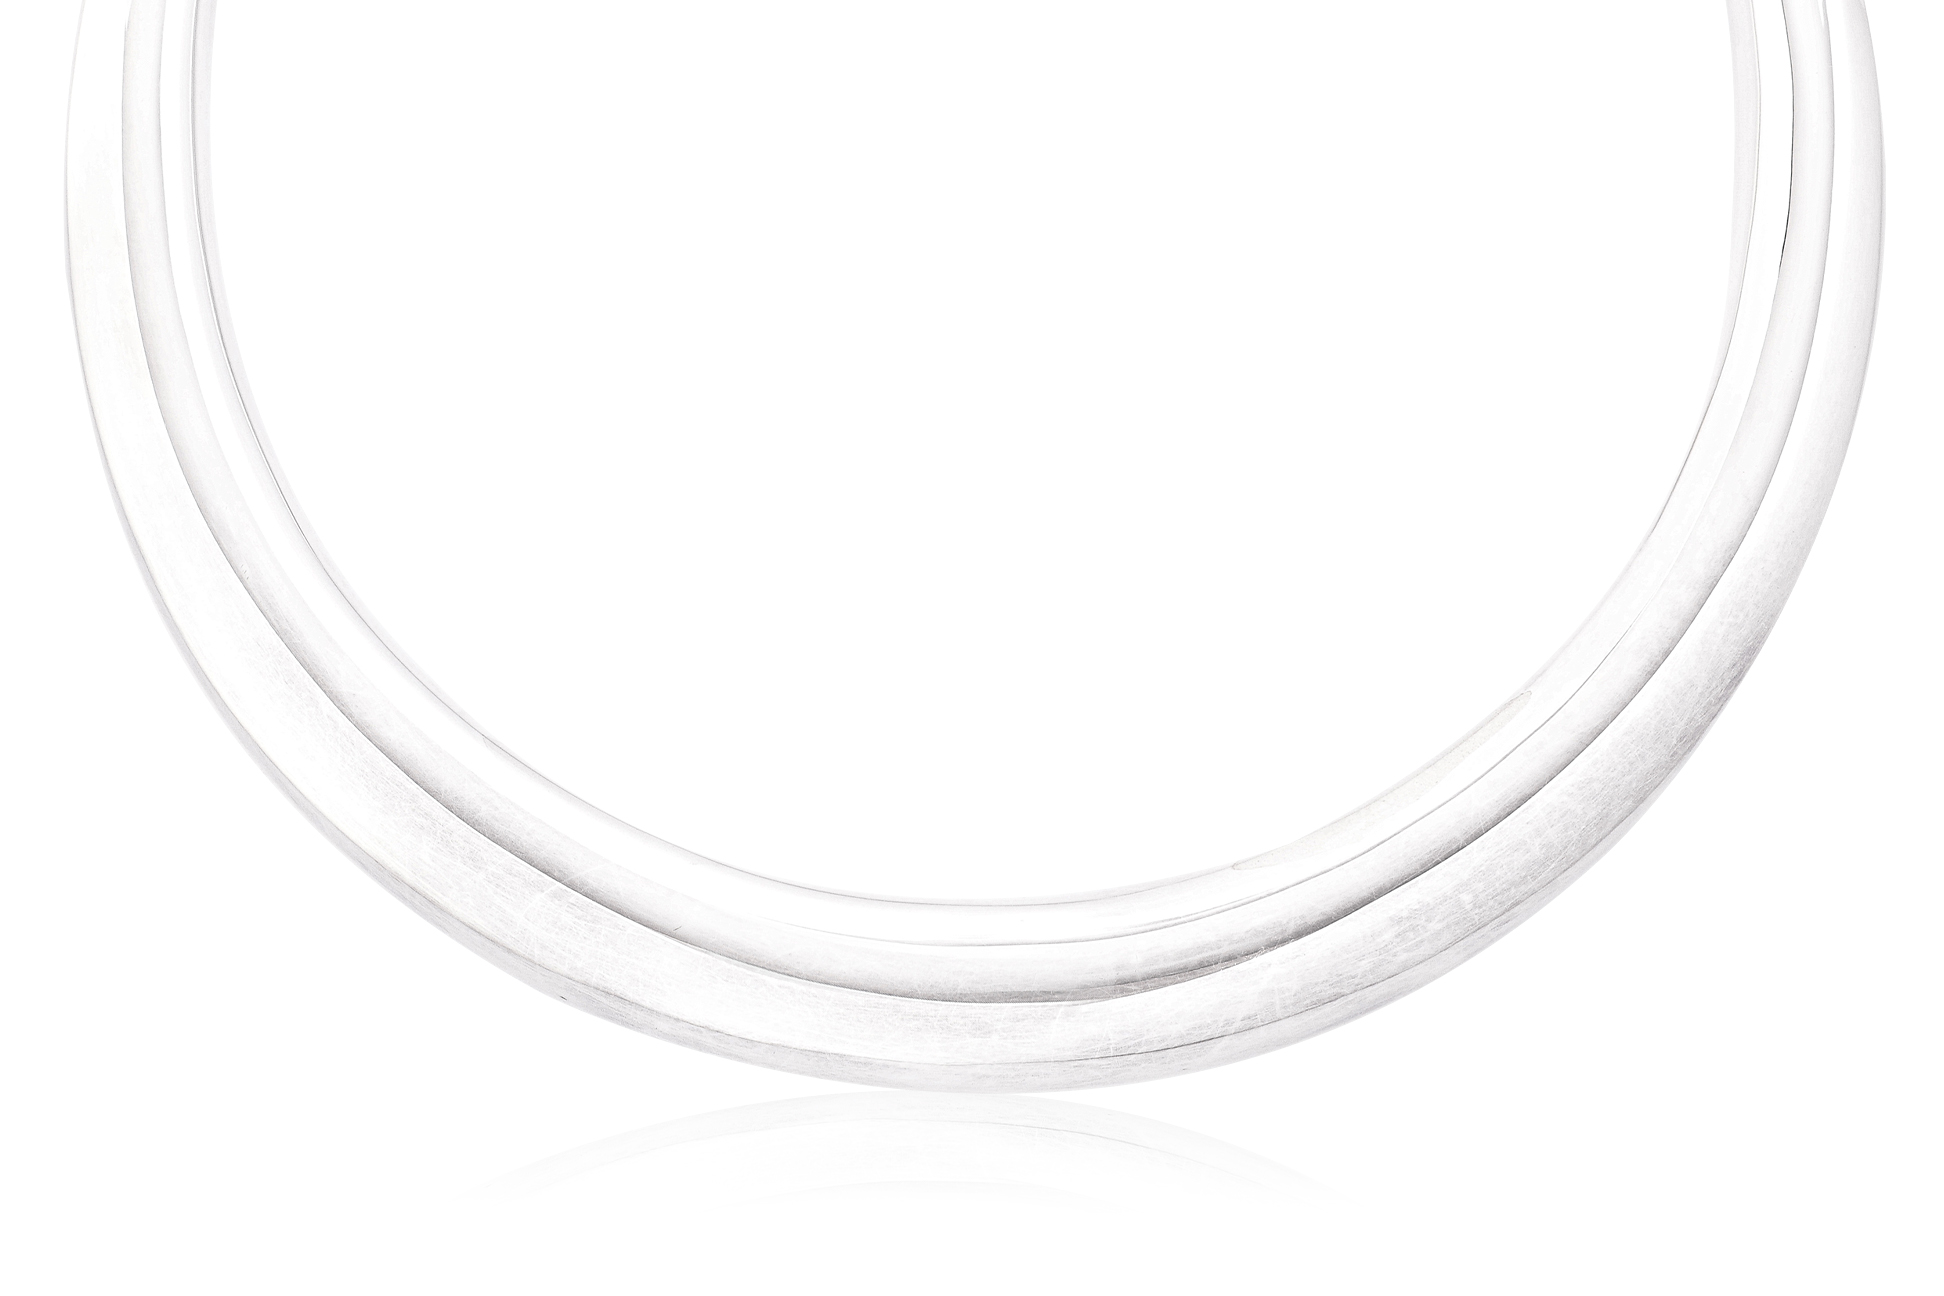 A LARGE SILVER CHOKER BY GEORG JENSEN - Image 2 of 4